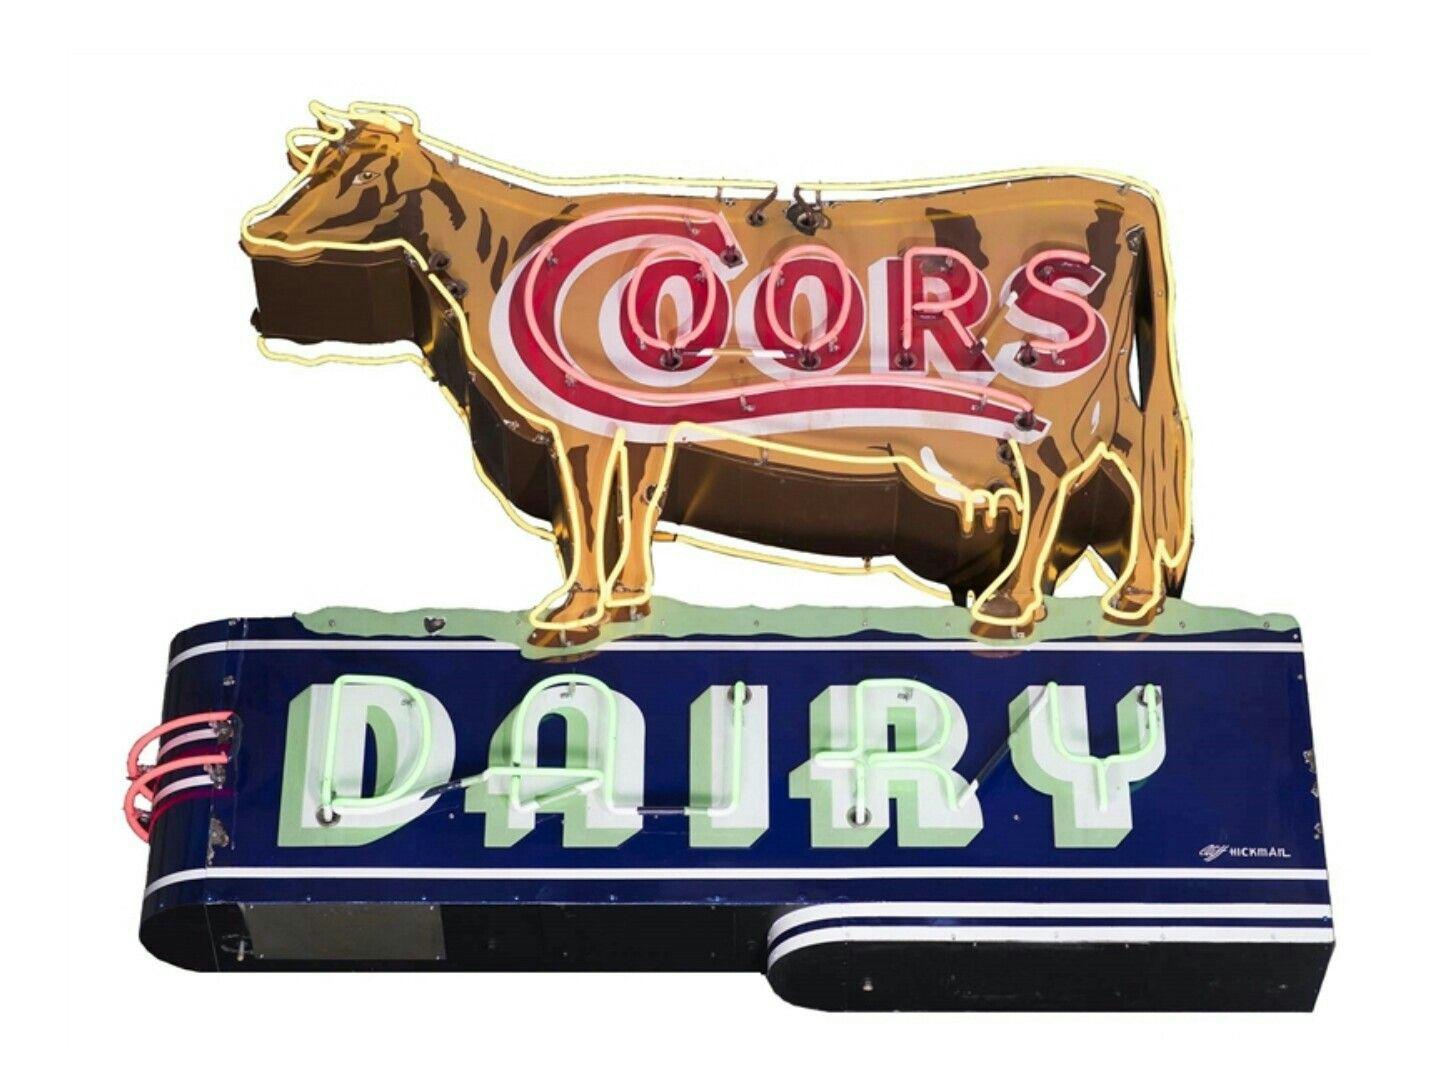 Old Coors Logo - RARE Original Coors Dairy Die Cut Porcelain / Neon Sign. Neon SIGNS